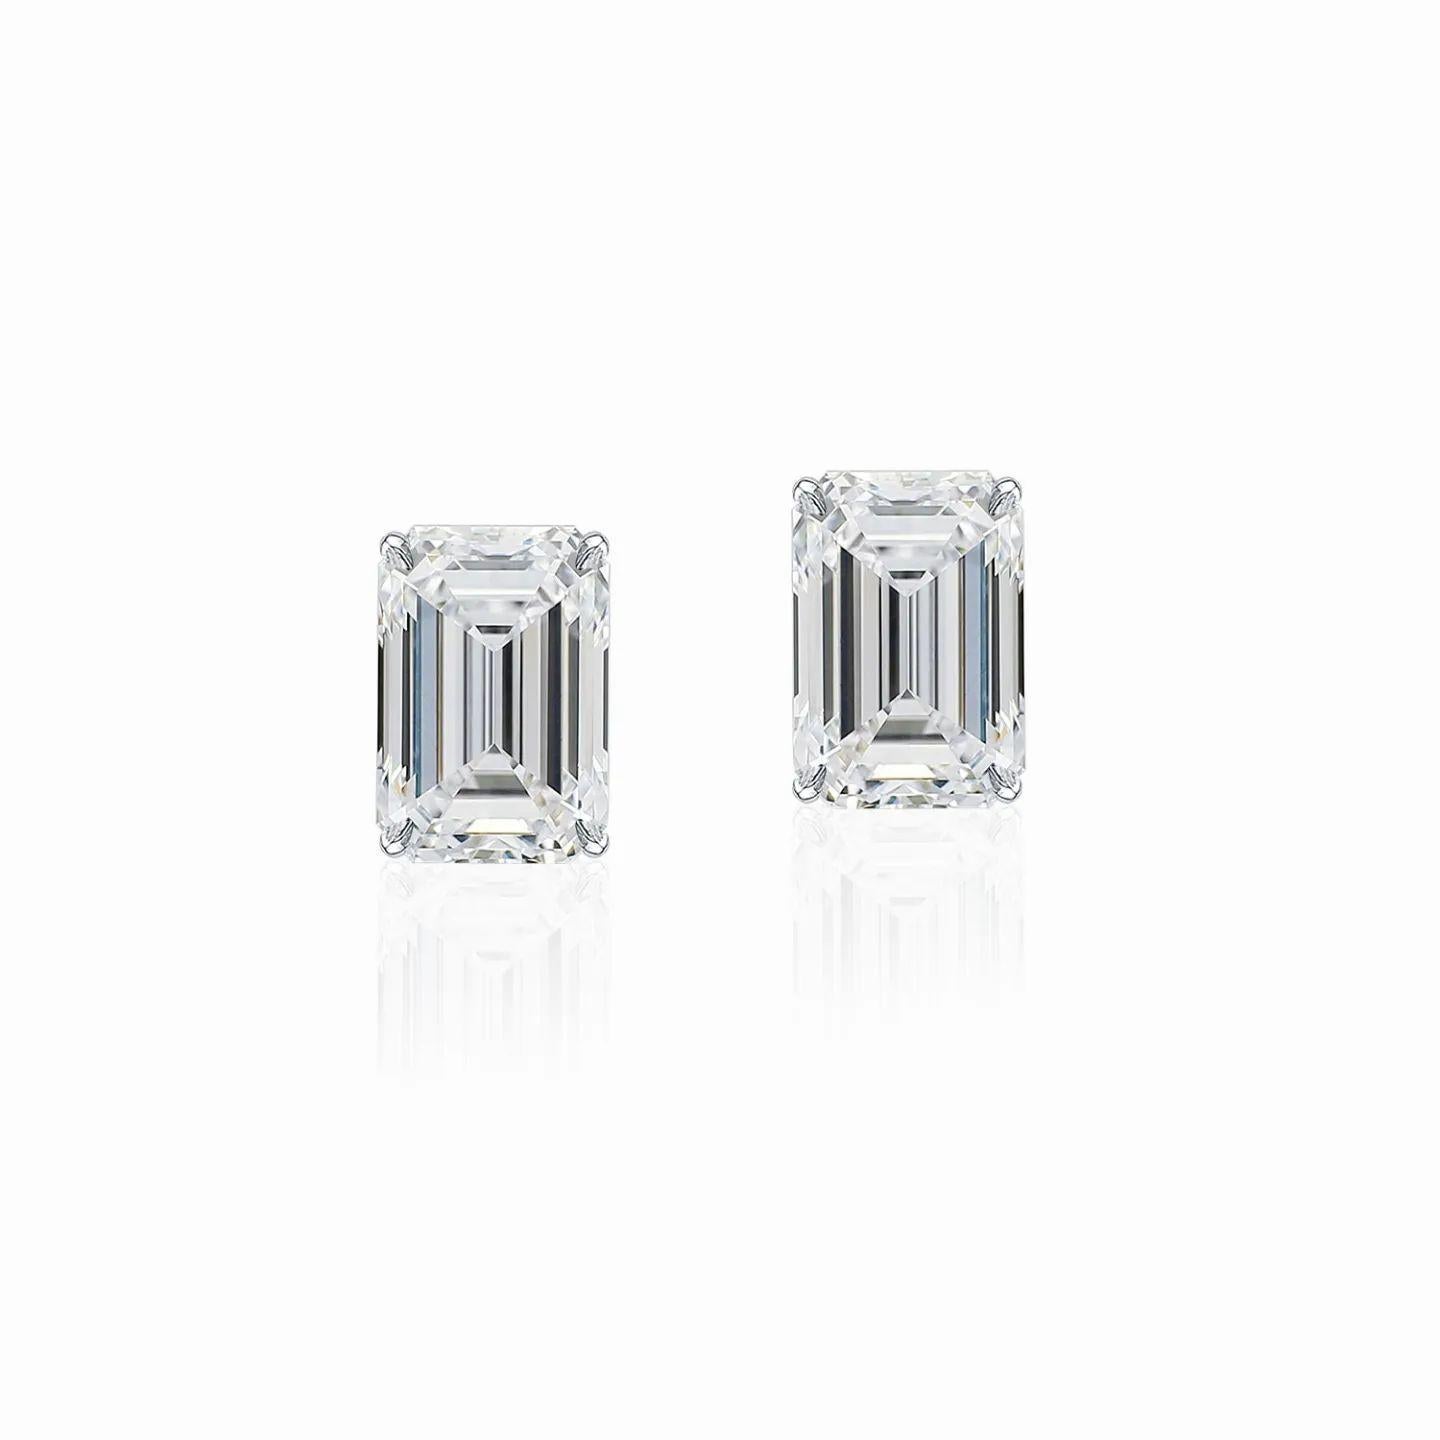 A perfect match!

6 carat total in size

GIA Certified

d color 

vs2 clarity